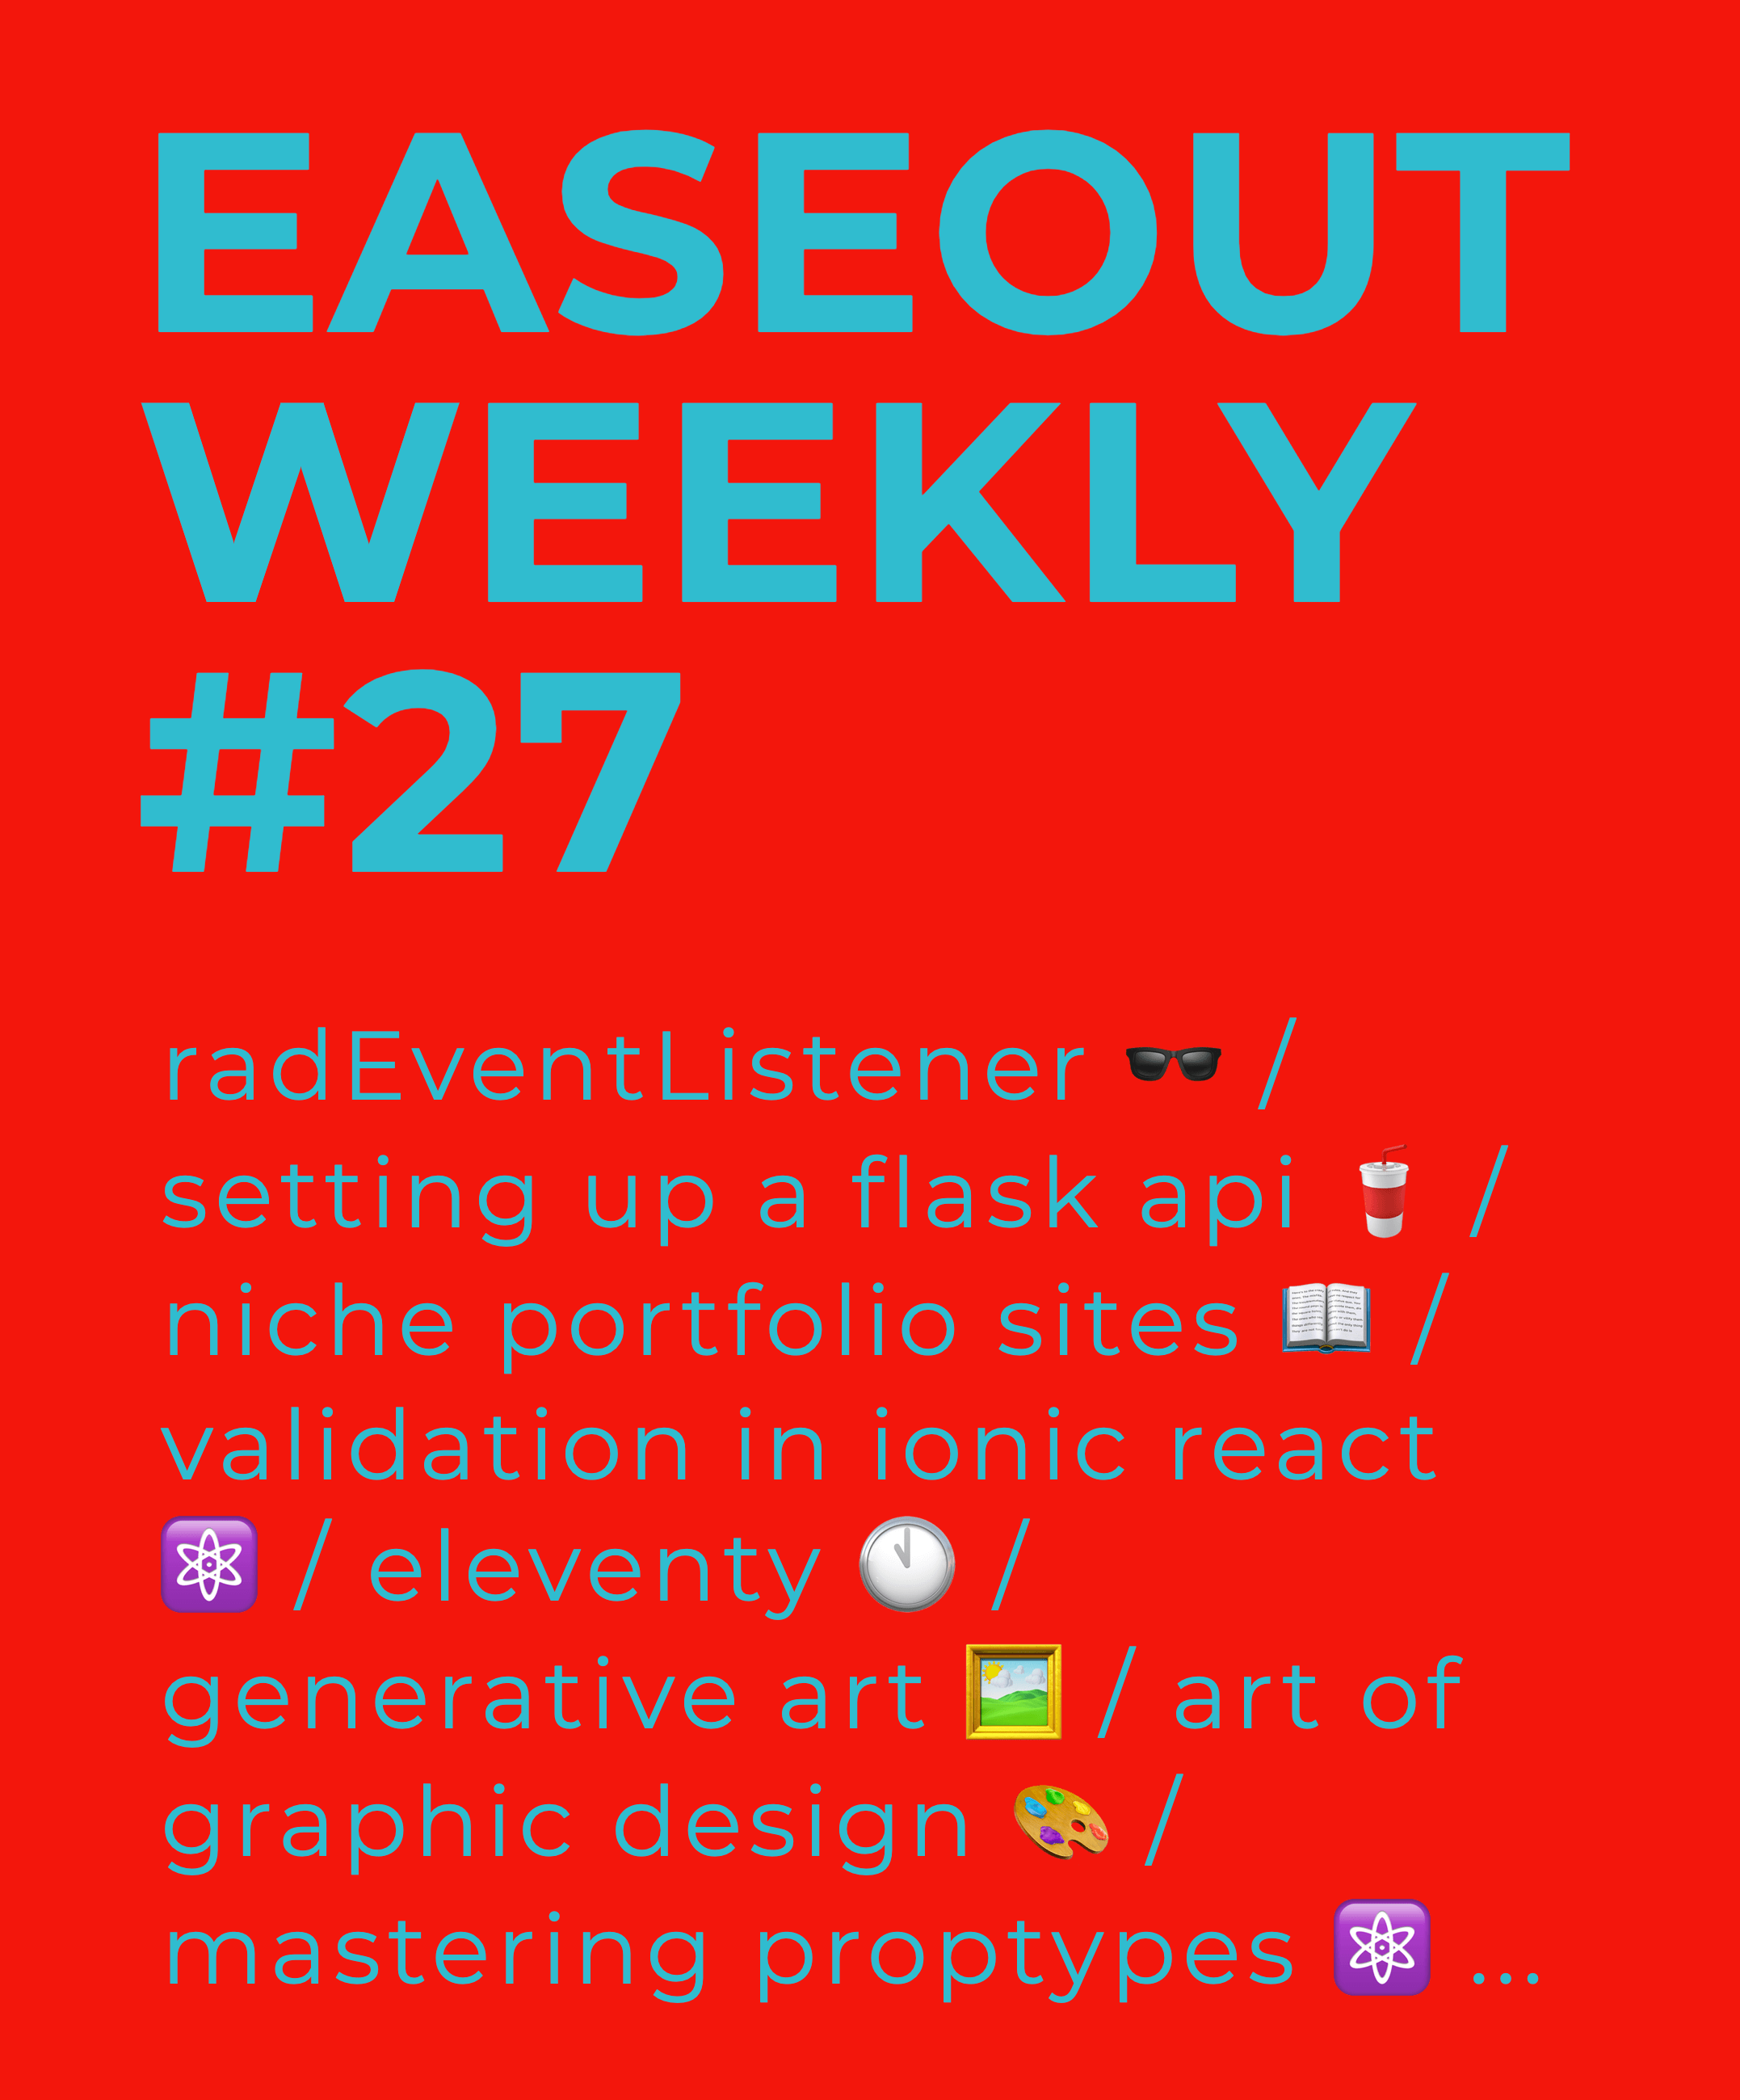 Easeout Weekly #27